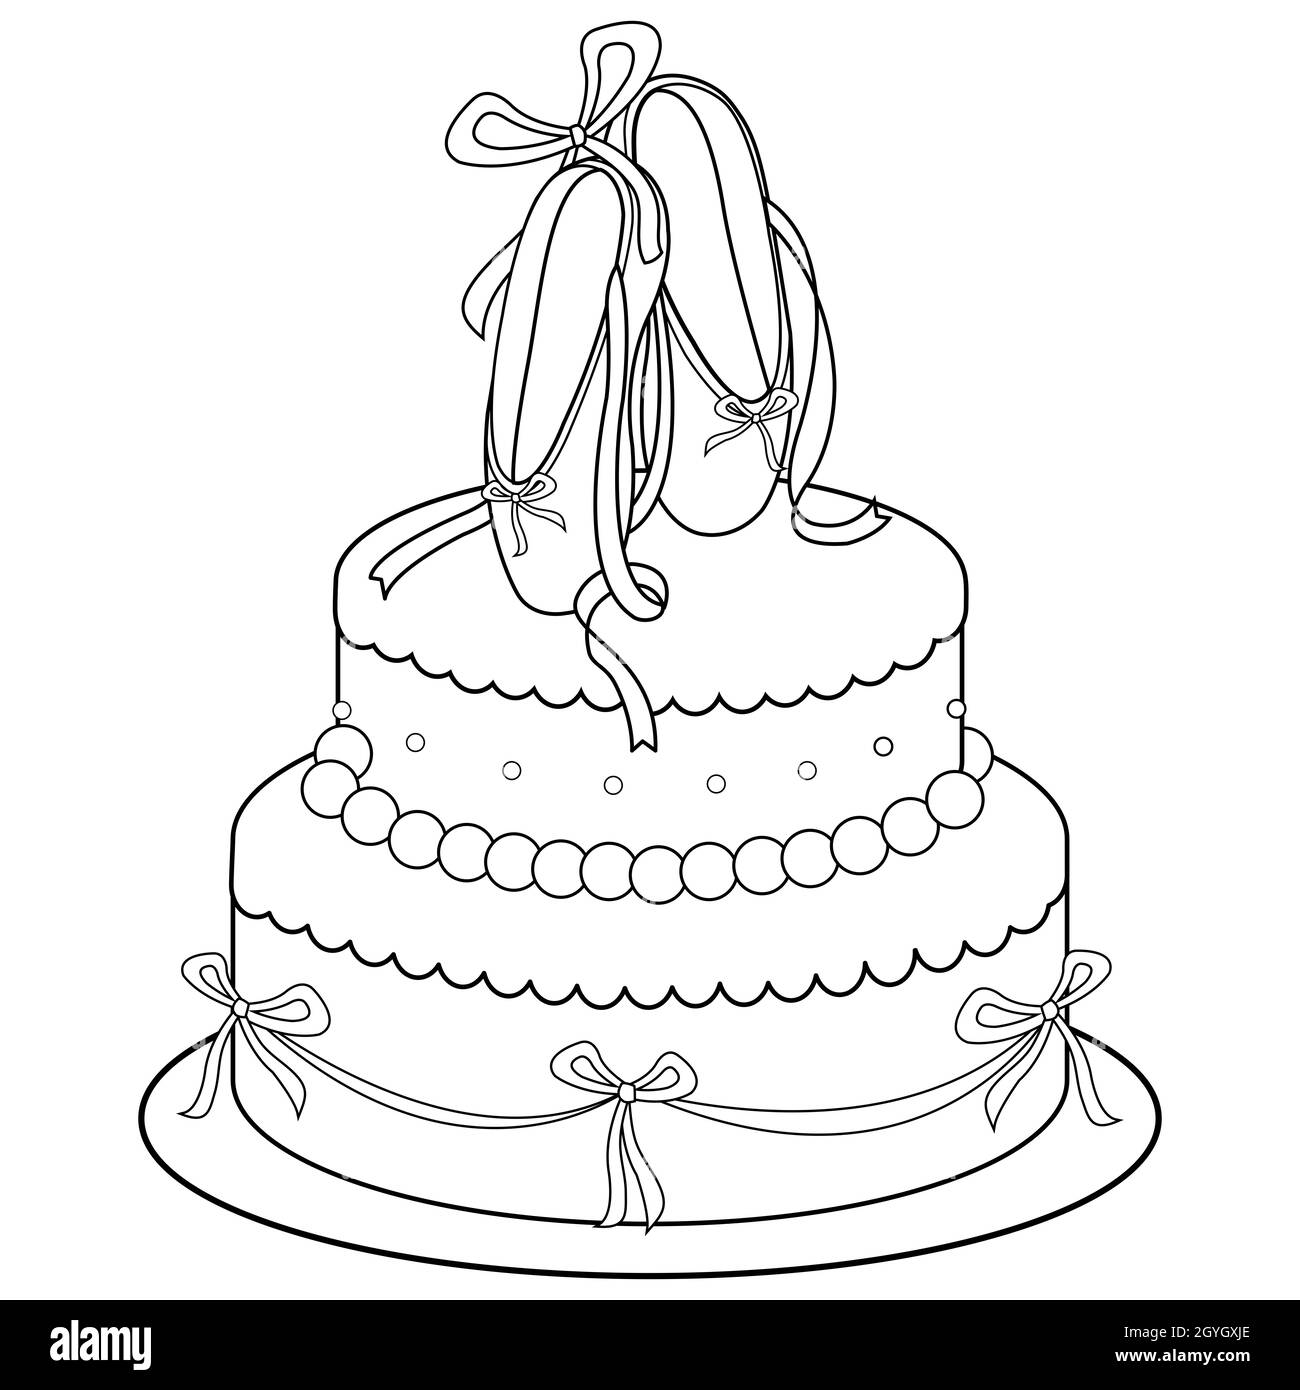 Birthday cake with ballet shoes. Black and white coloring page Stock Photo